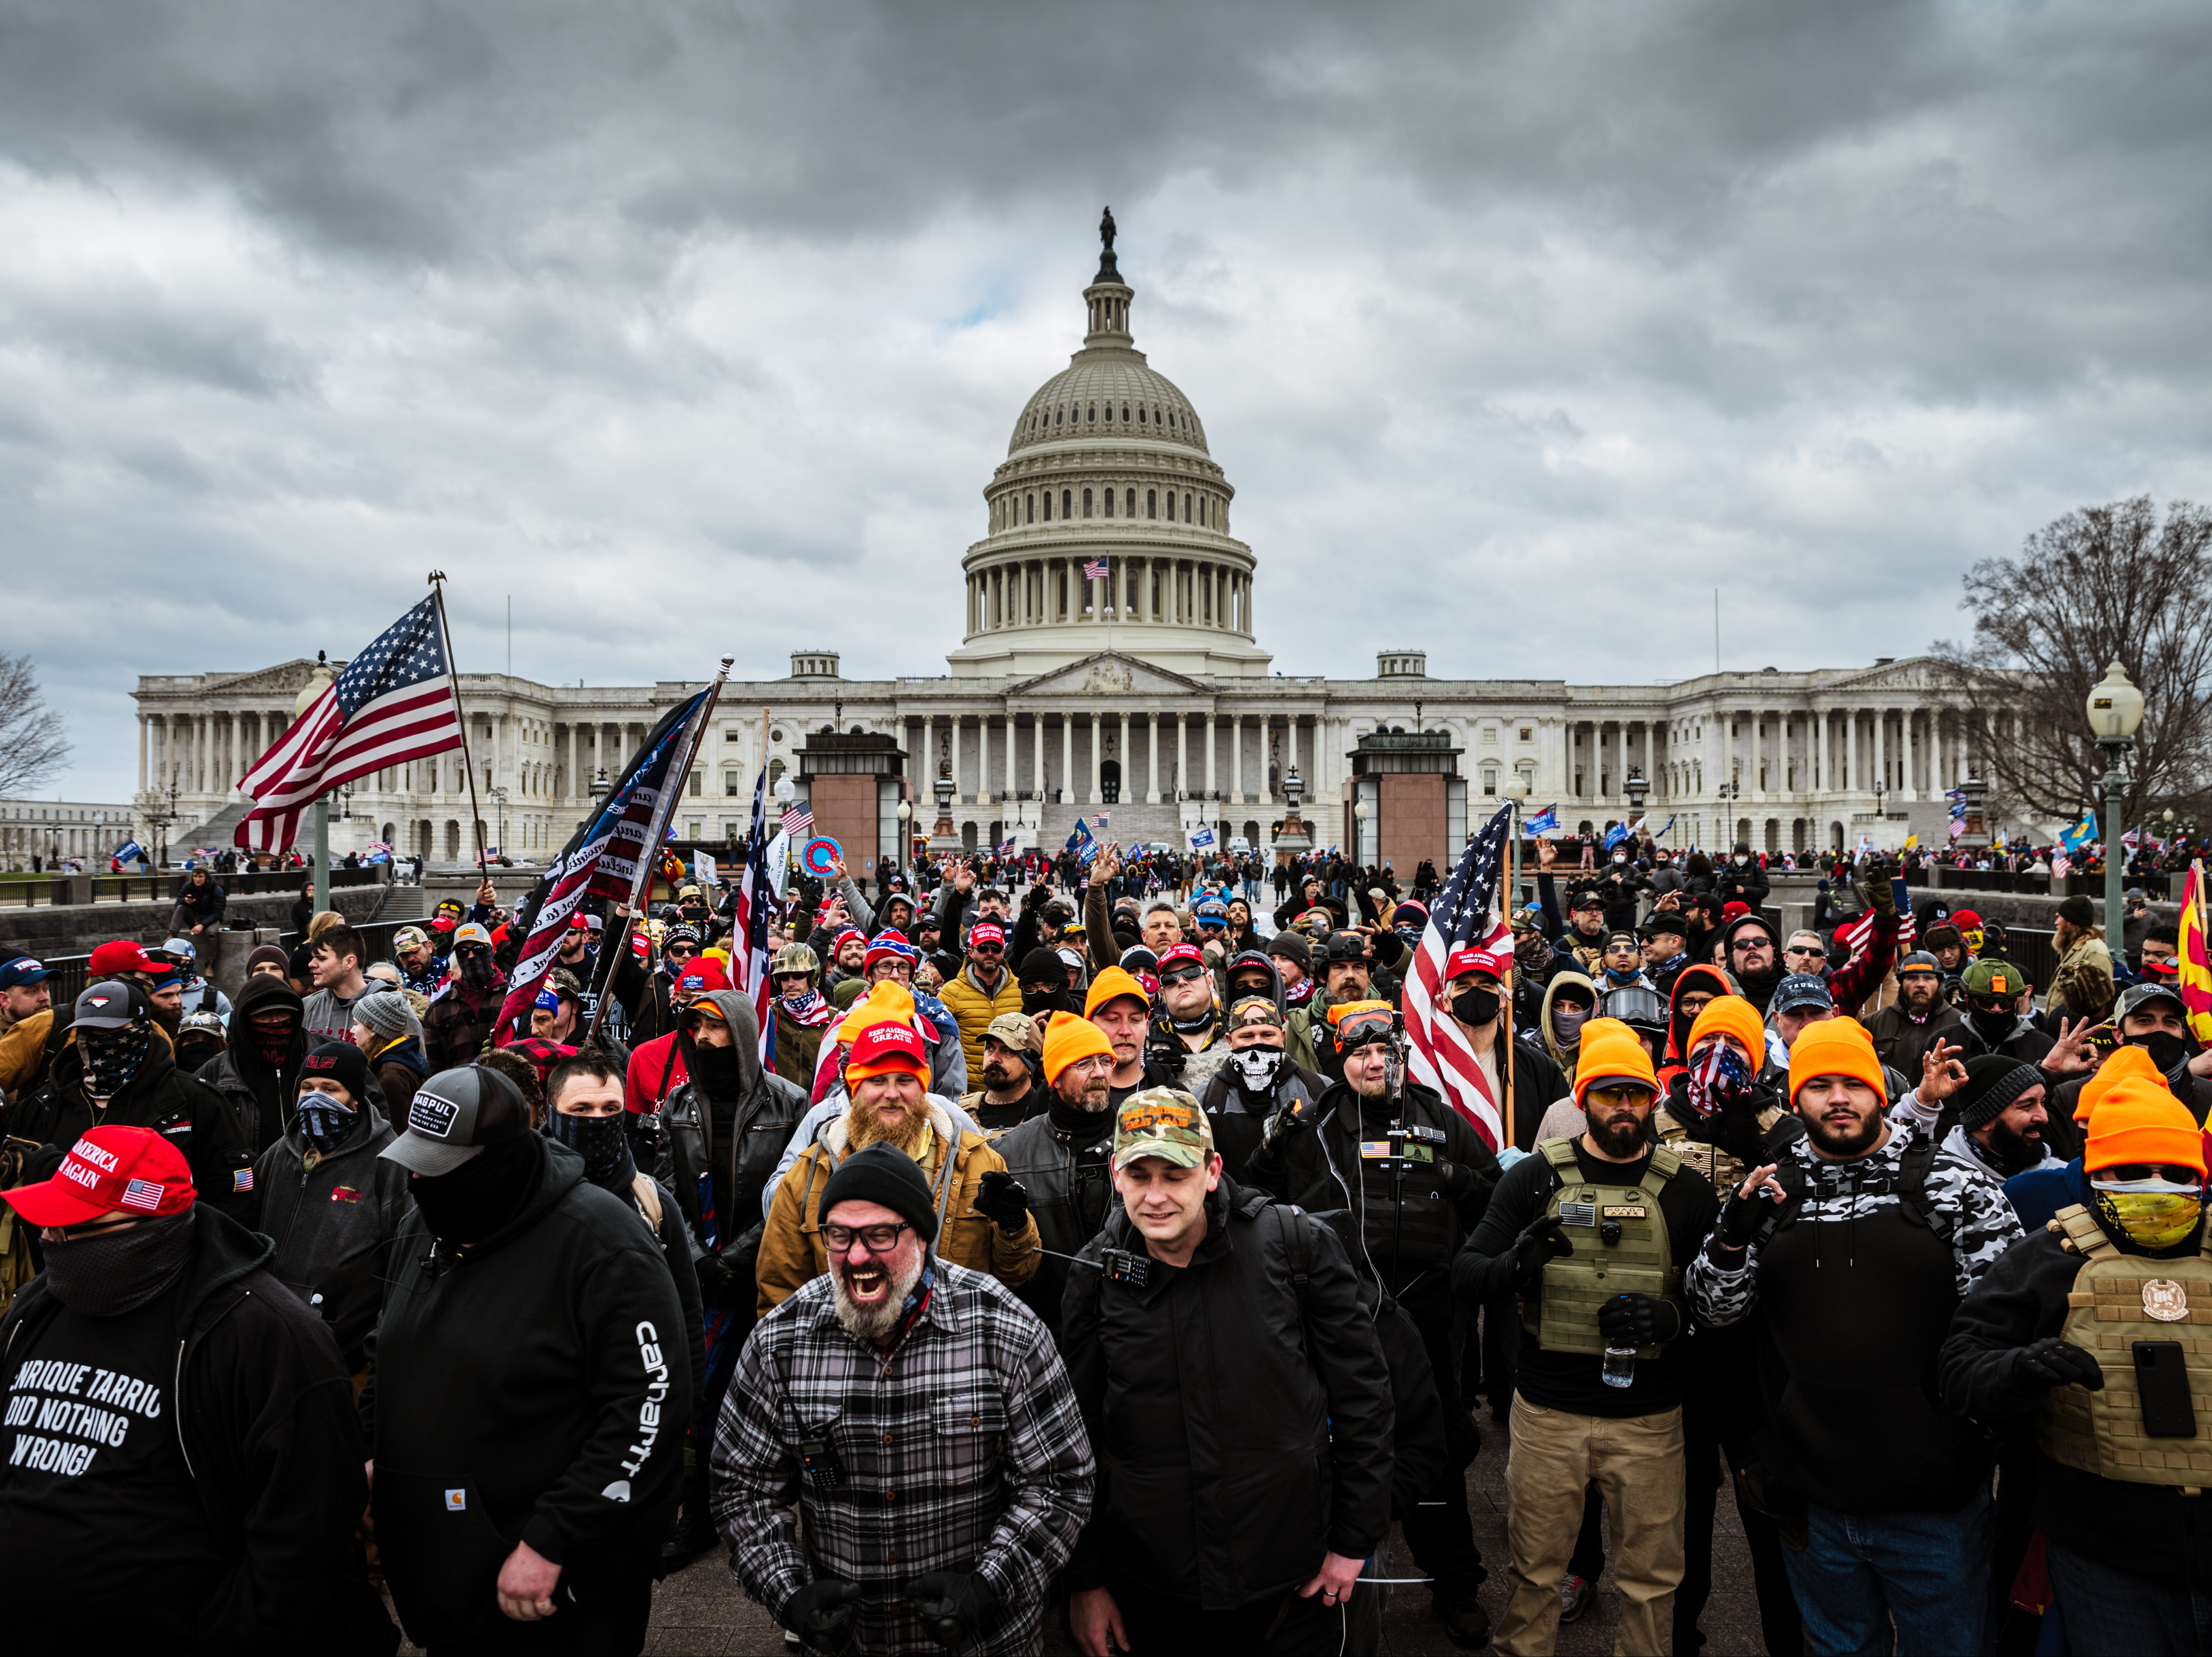 Donald Trump protesters gather in front of the US Capitol Building on 6 January, 2021